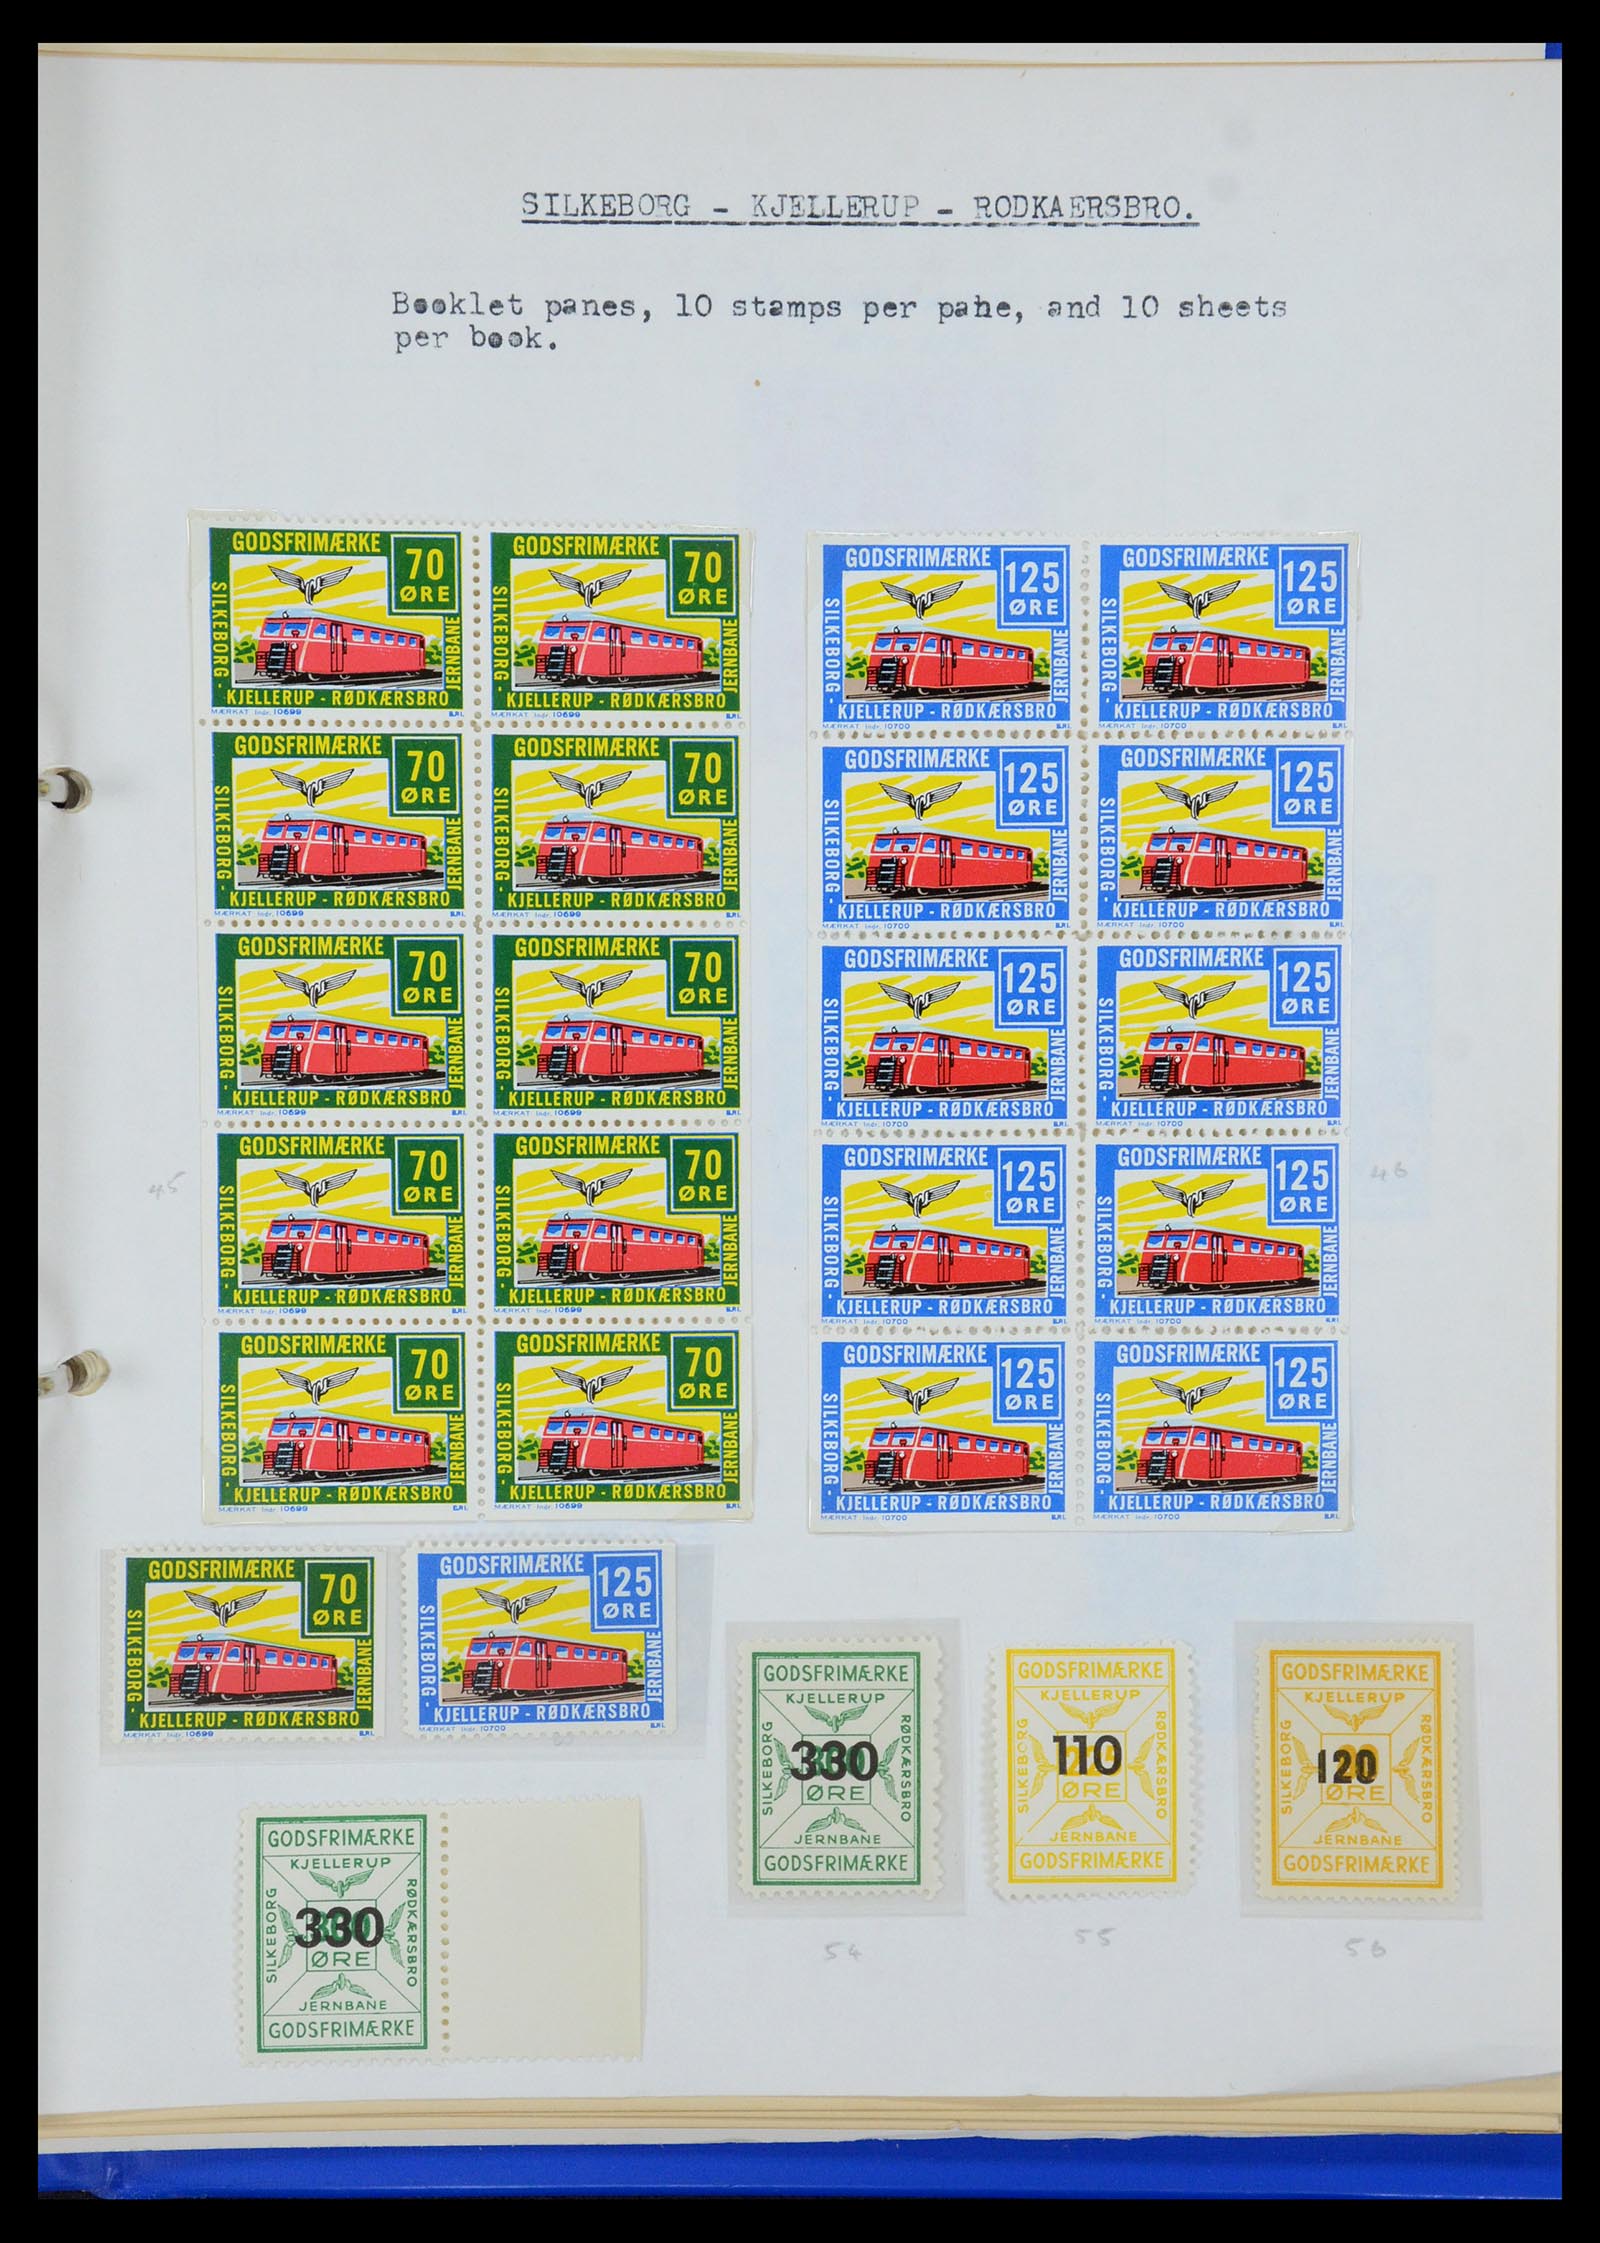 35650 086 - Stamp Collection 35650 Denmark railroad stamps.